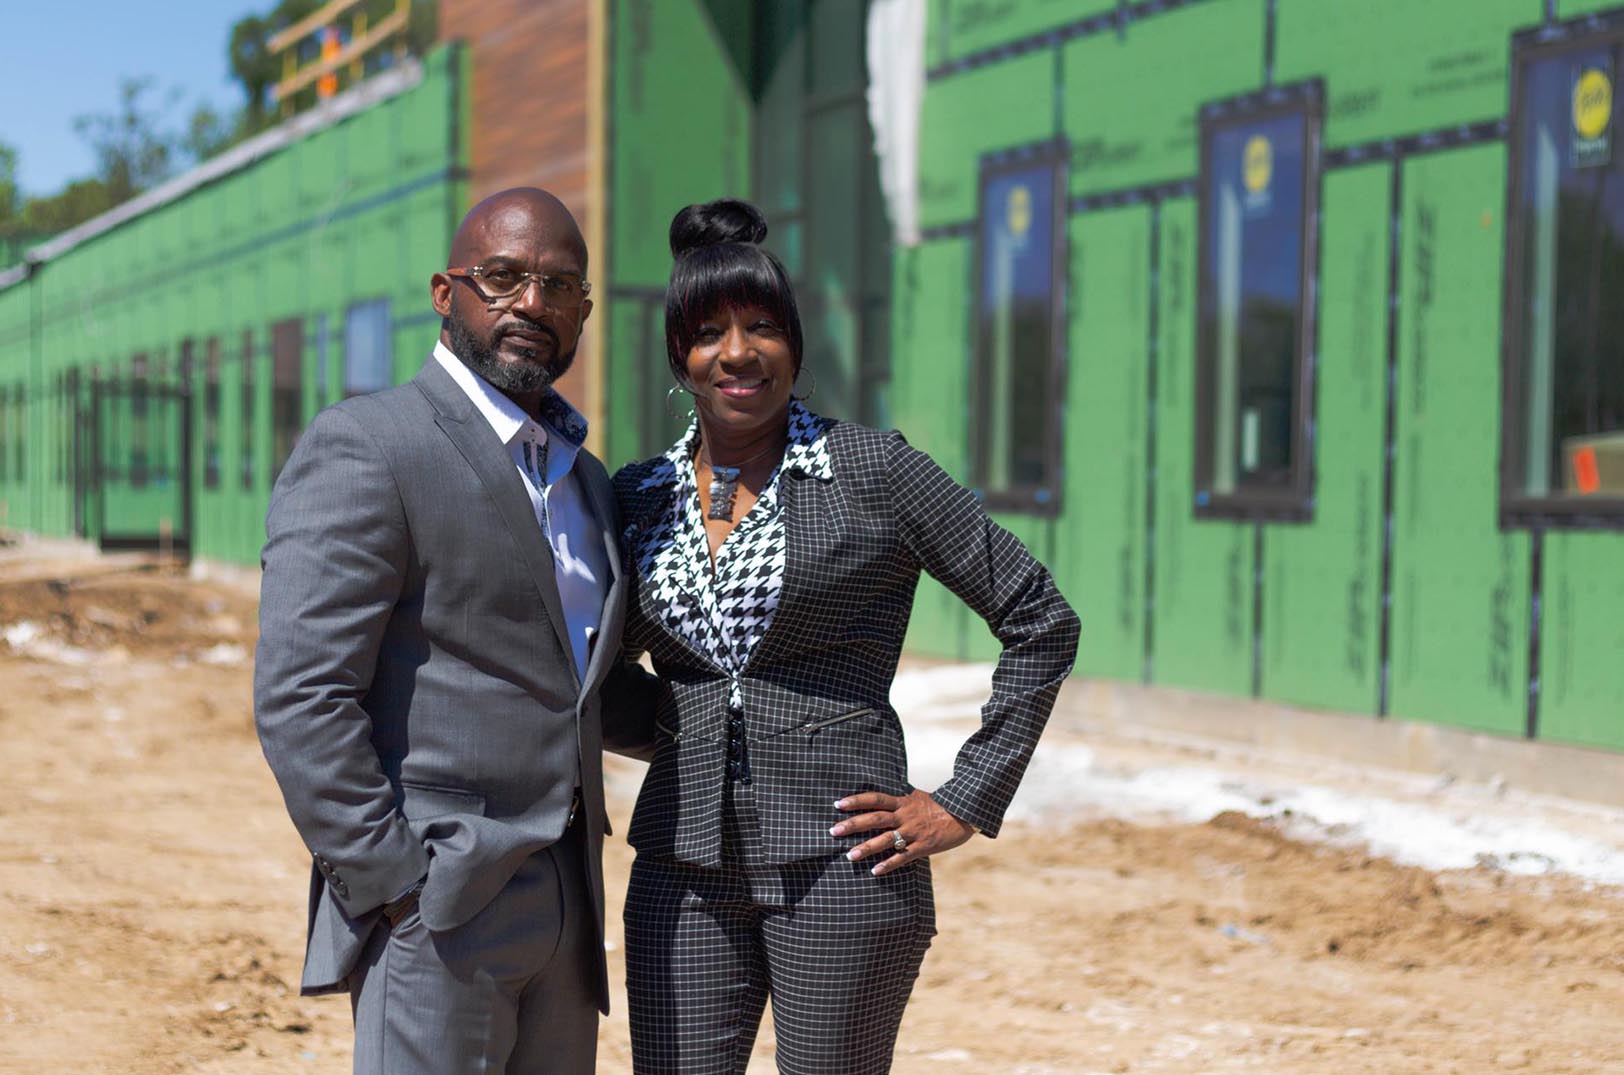 KC couple’s 15-year journey evolves into $4M 24-hour child care center in urban core